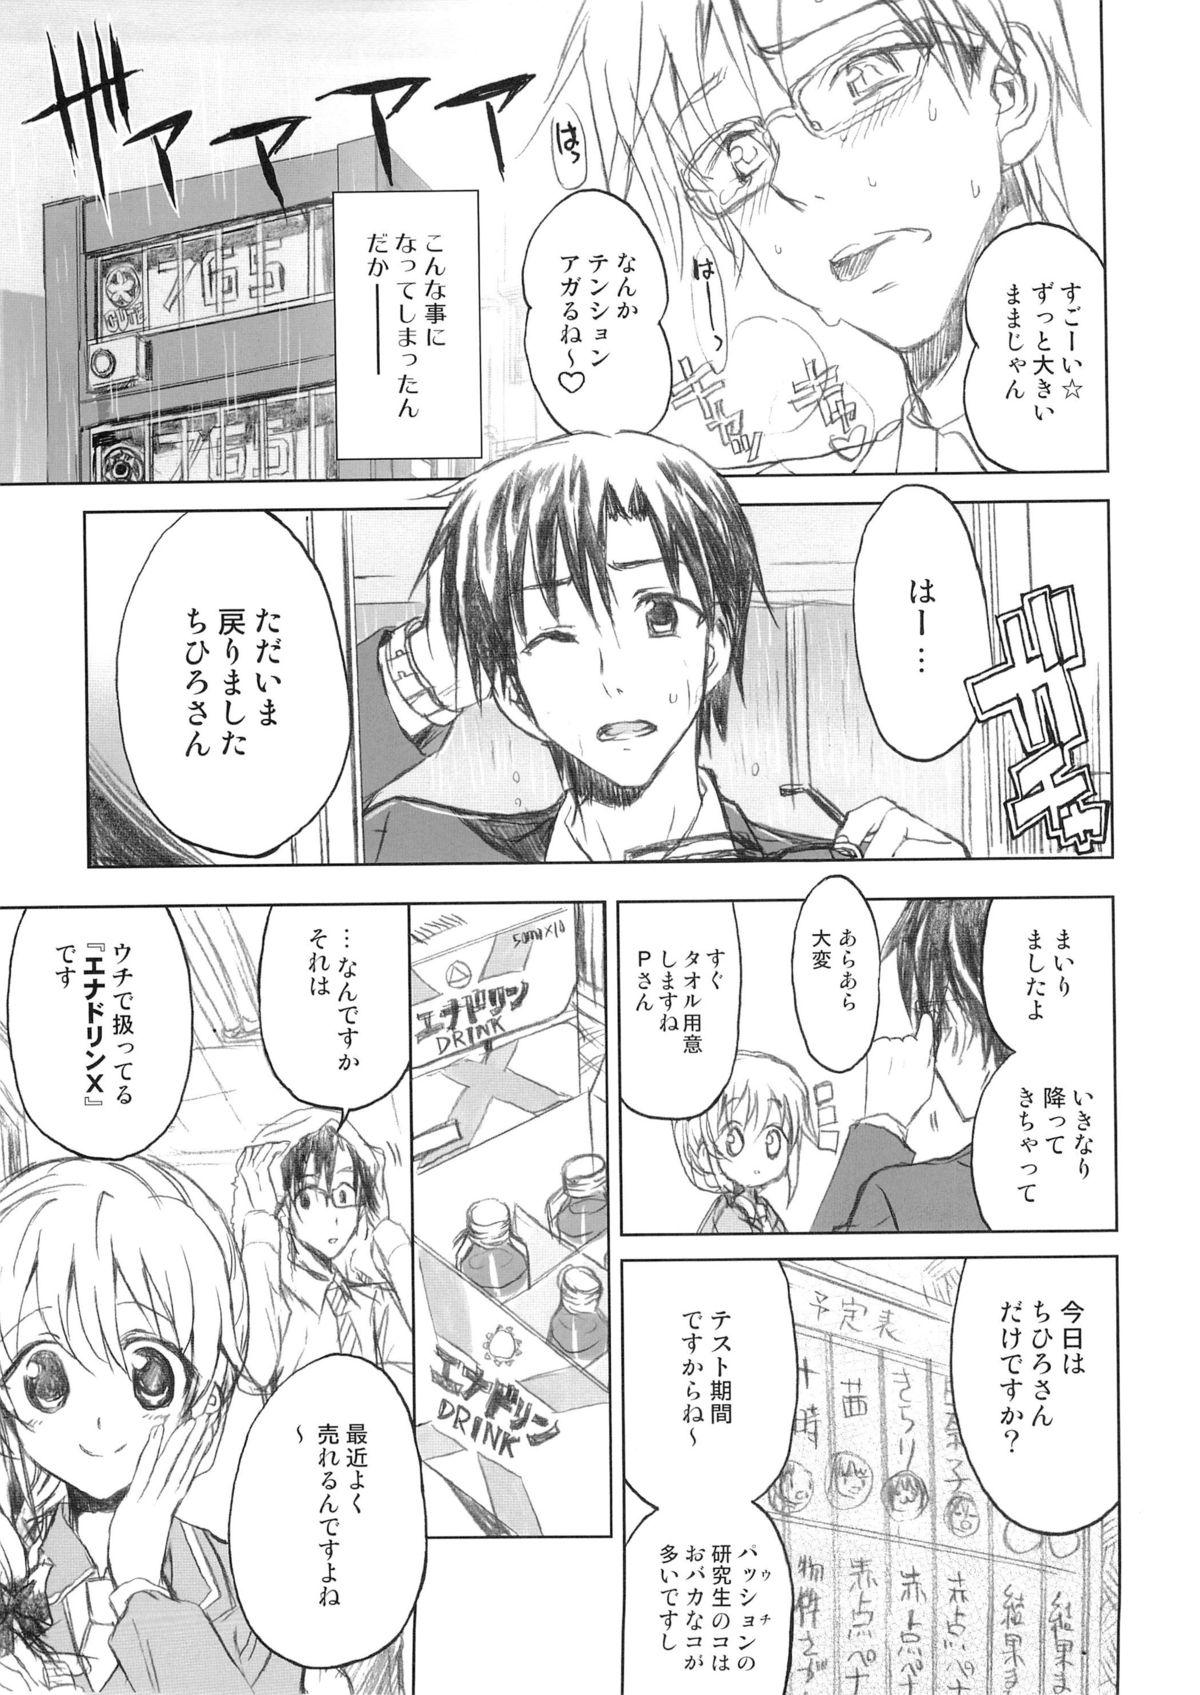 Wives PASSION FRUITS GIRLS #2 "Jougasaki Mika" - The idolmaster Home - Page 8